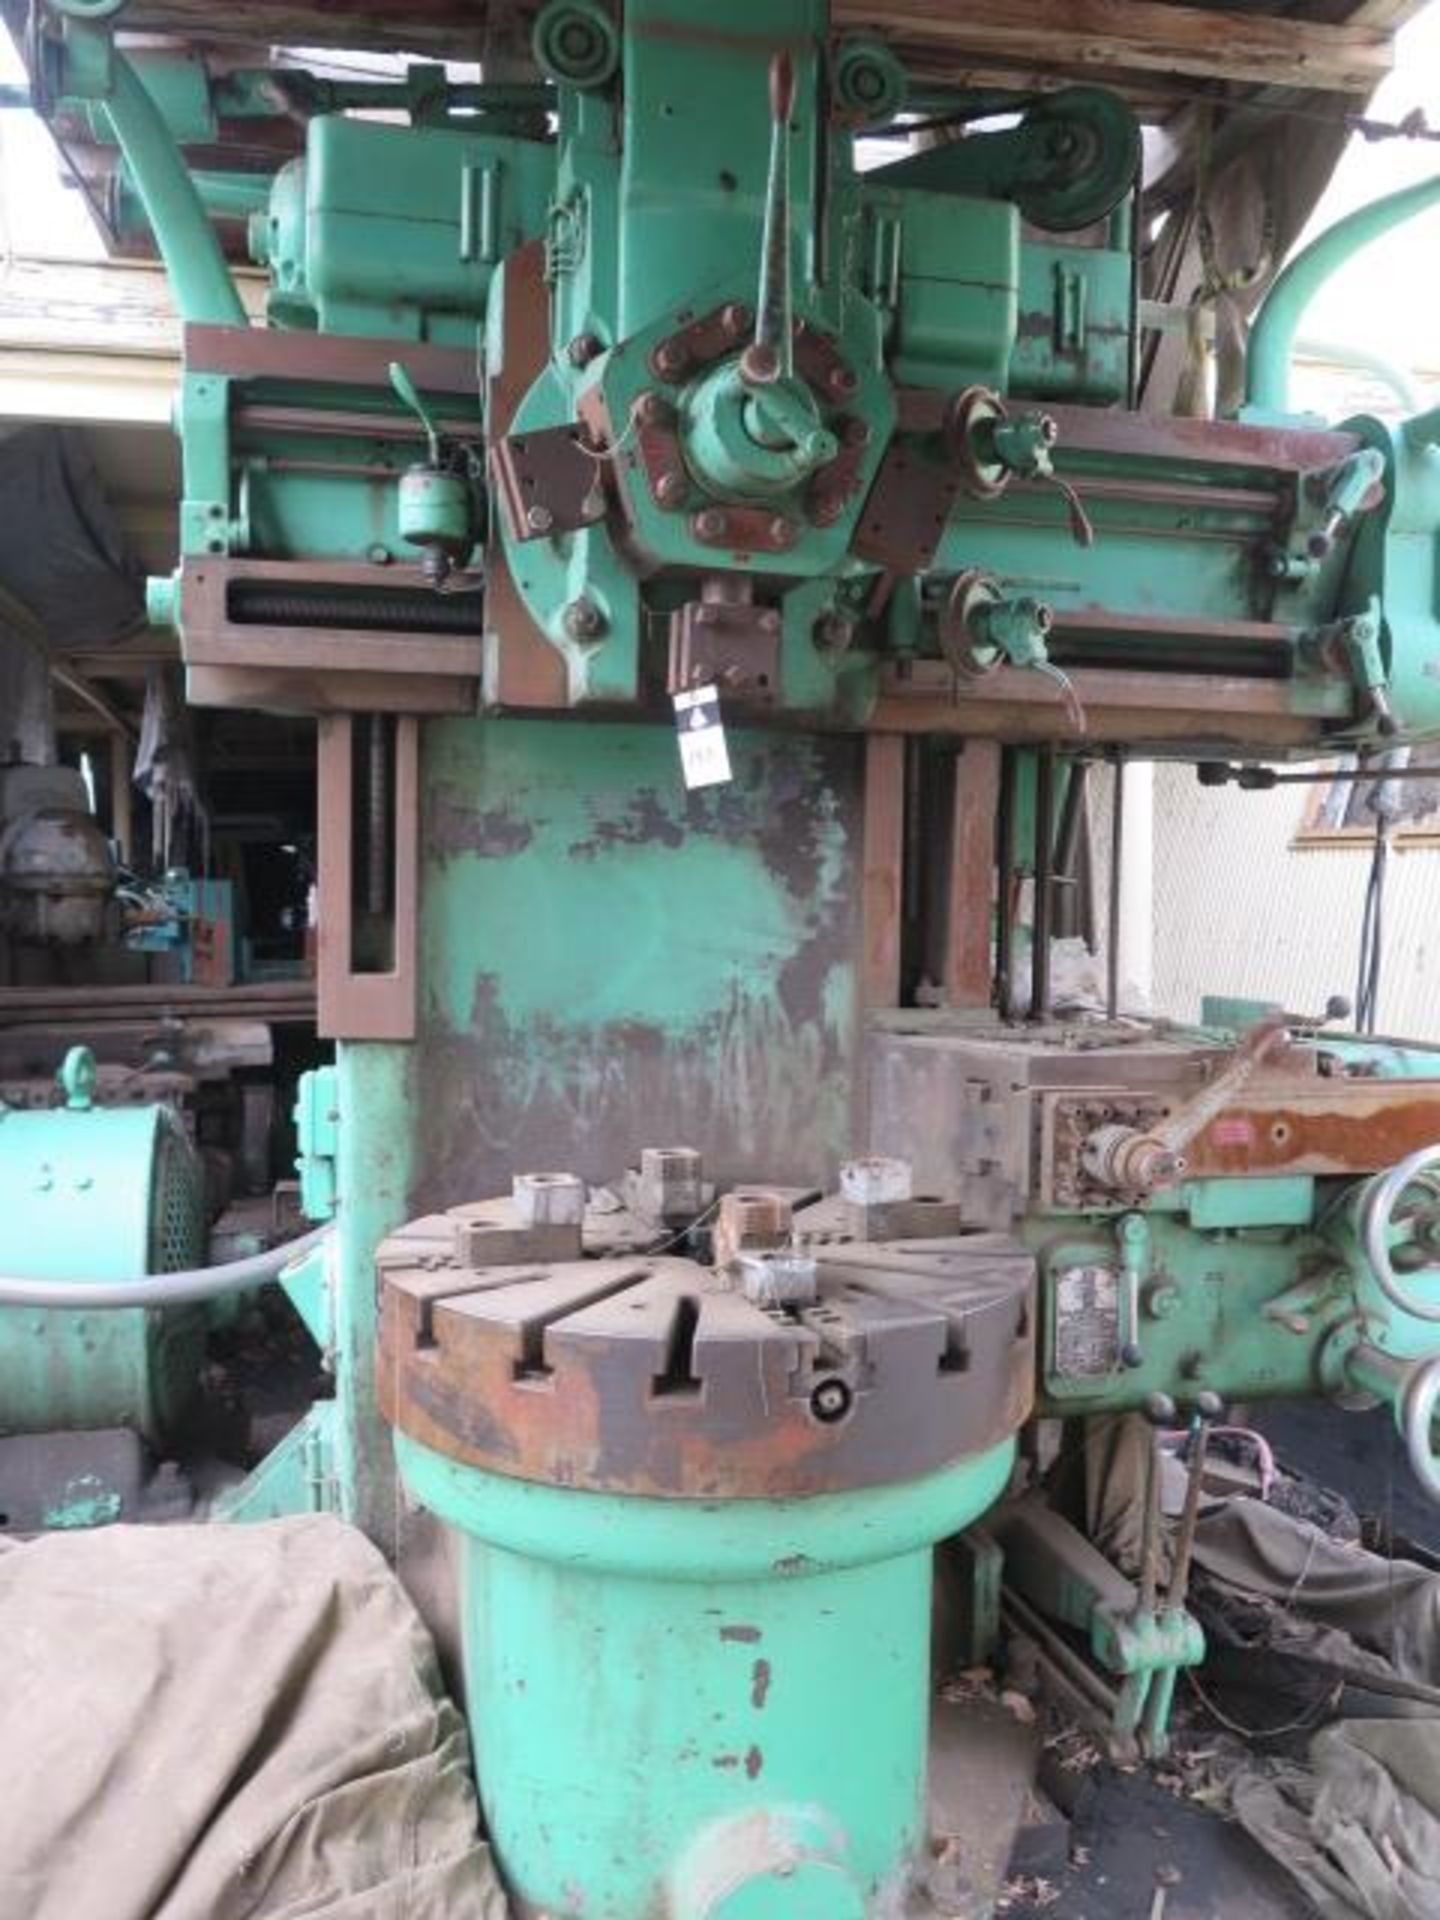 King 36" Vertical Turret Lathe s/n 2615 w/ 5-Station Indexing Head, Facing / Turning Head,SOLD AS IS